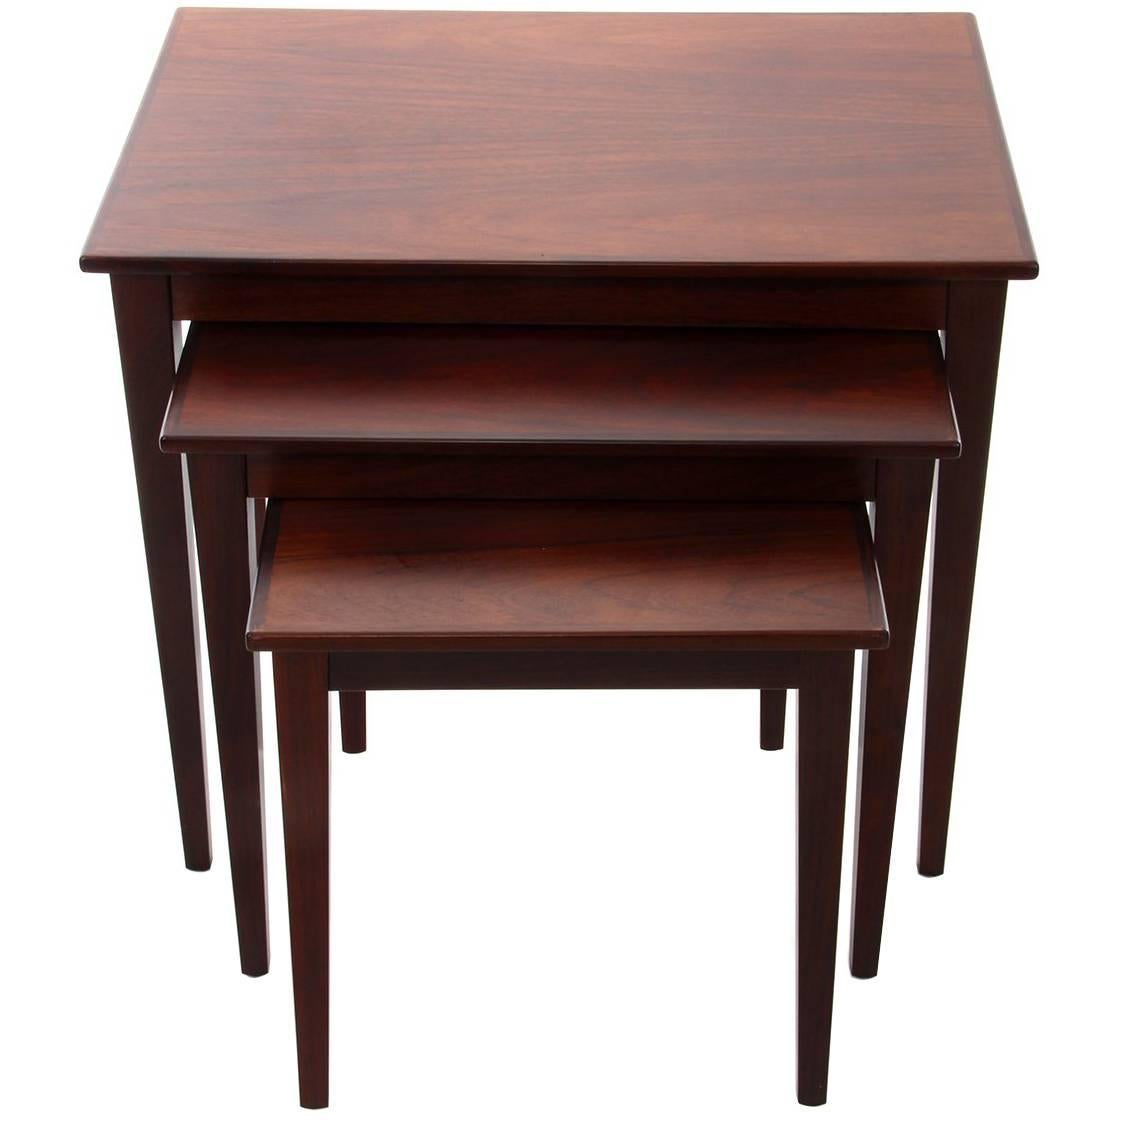 Rosewood Nesting Tables, 1950s, Set of Danish Mid-Century Modern Nested Tables